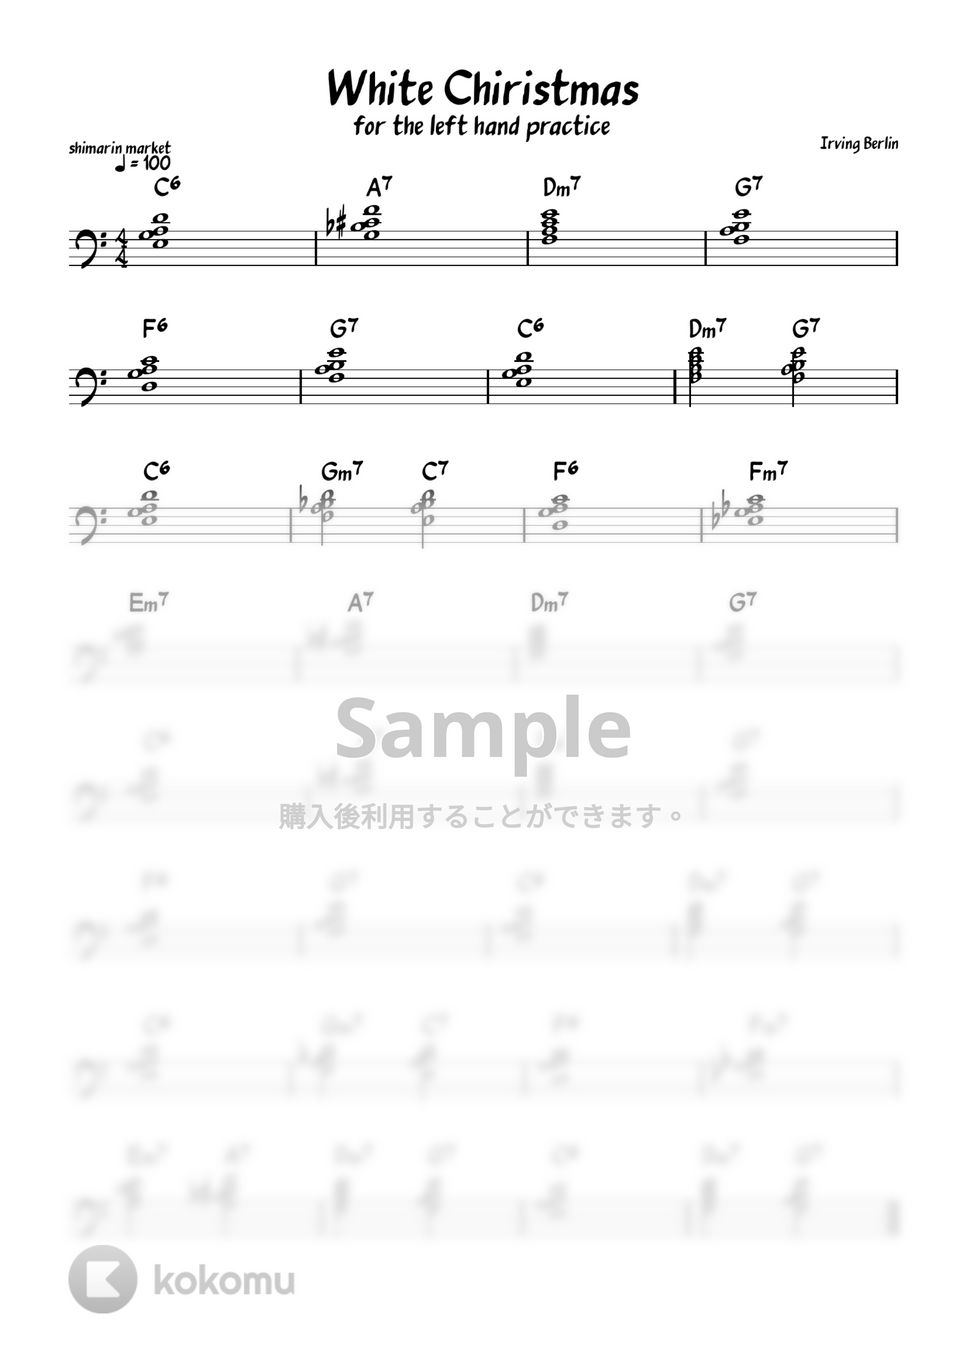 Irving Berlin - White Christmas (for the left hand practice) by shimarin market